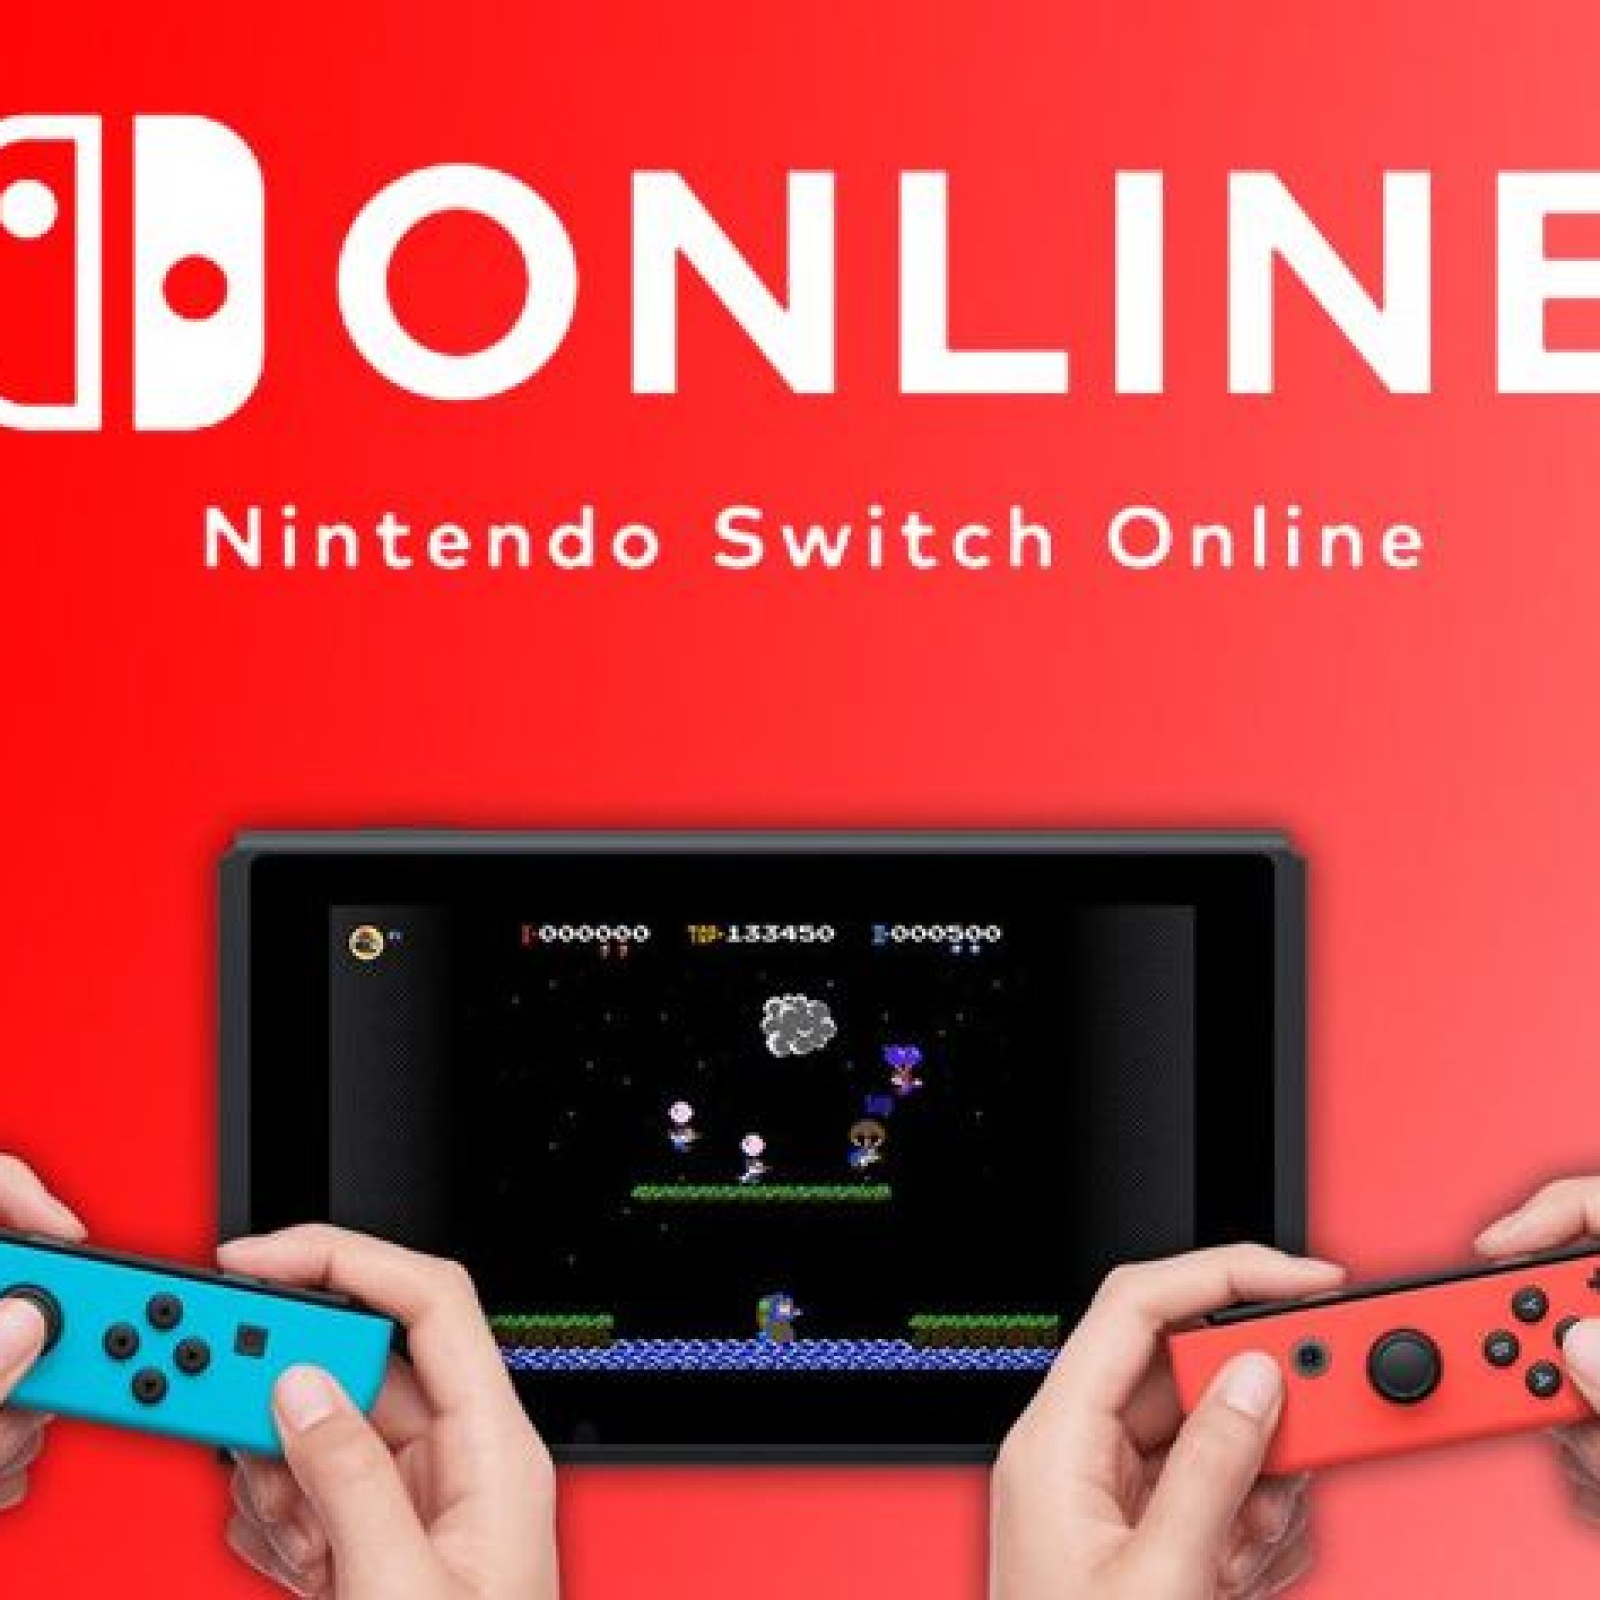 Nintendo Switch Online Subscription Service - Nintendo Switch Guide - IGN